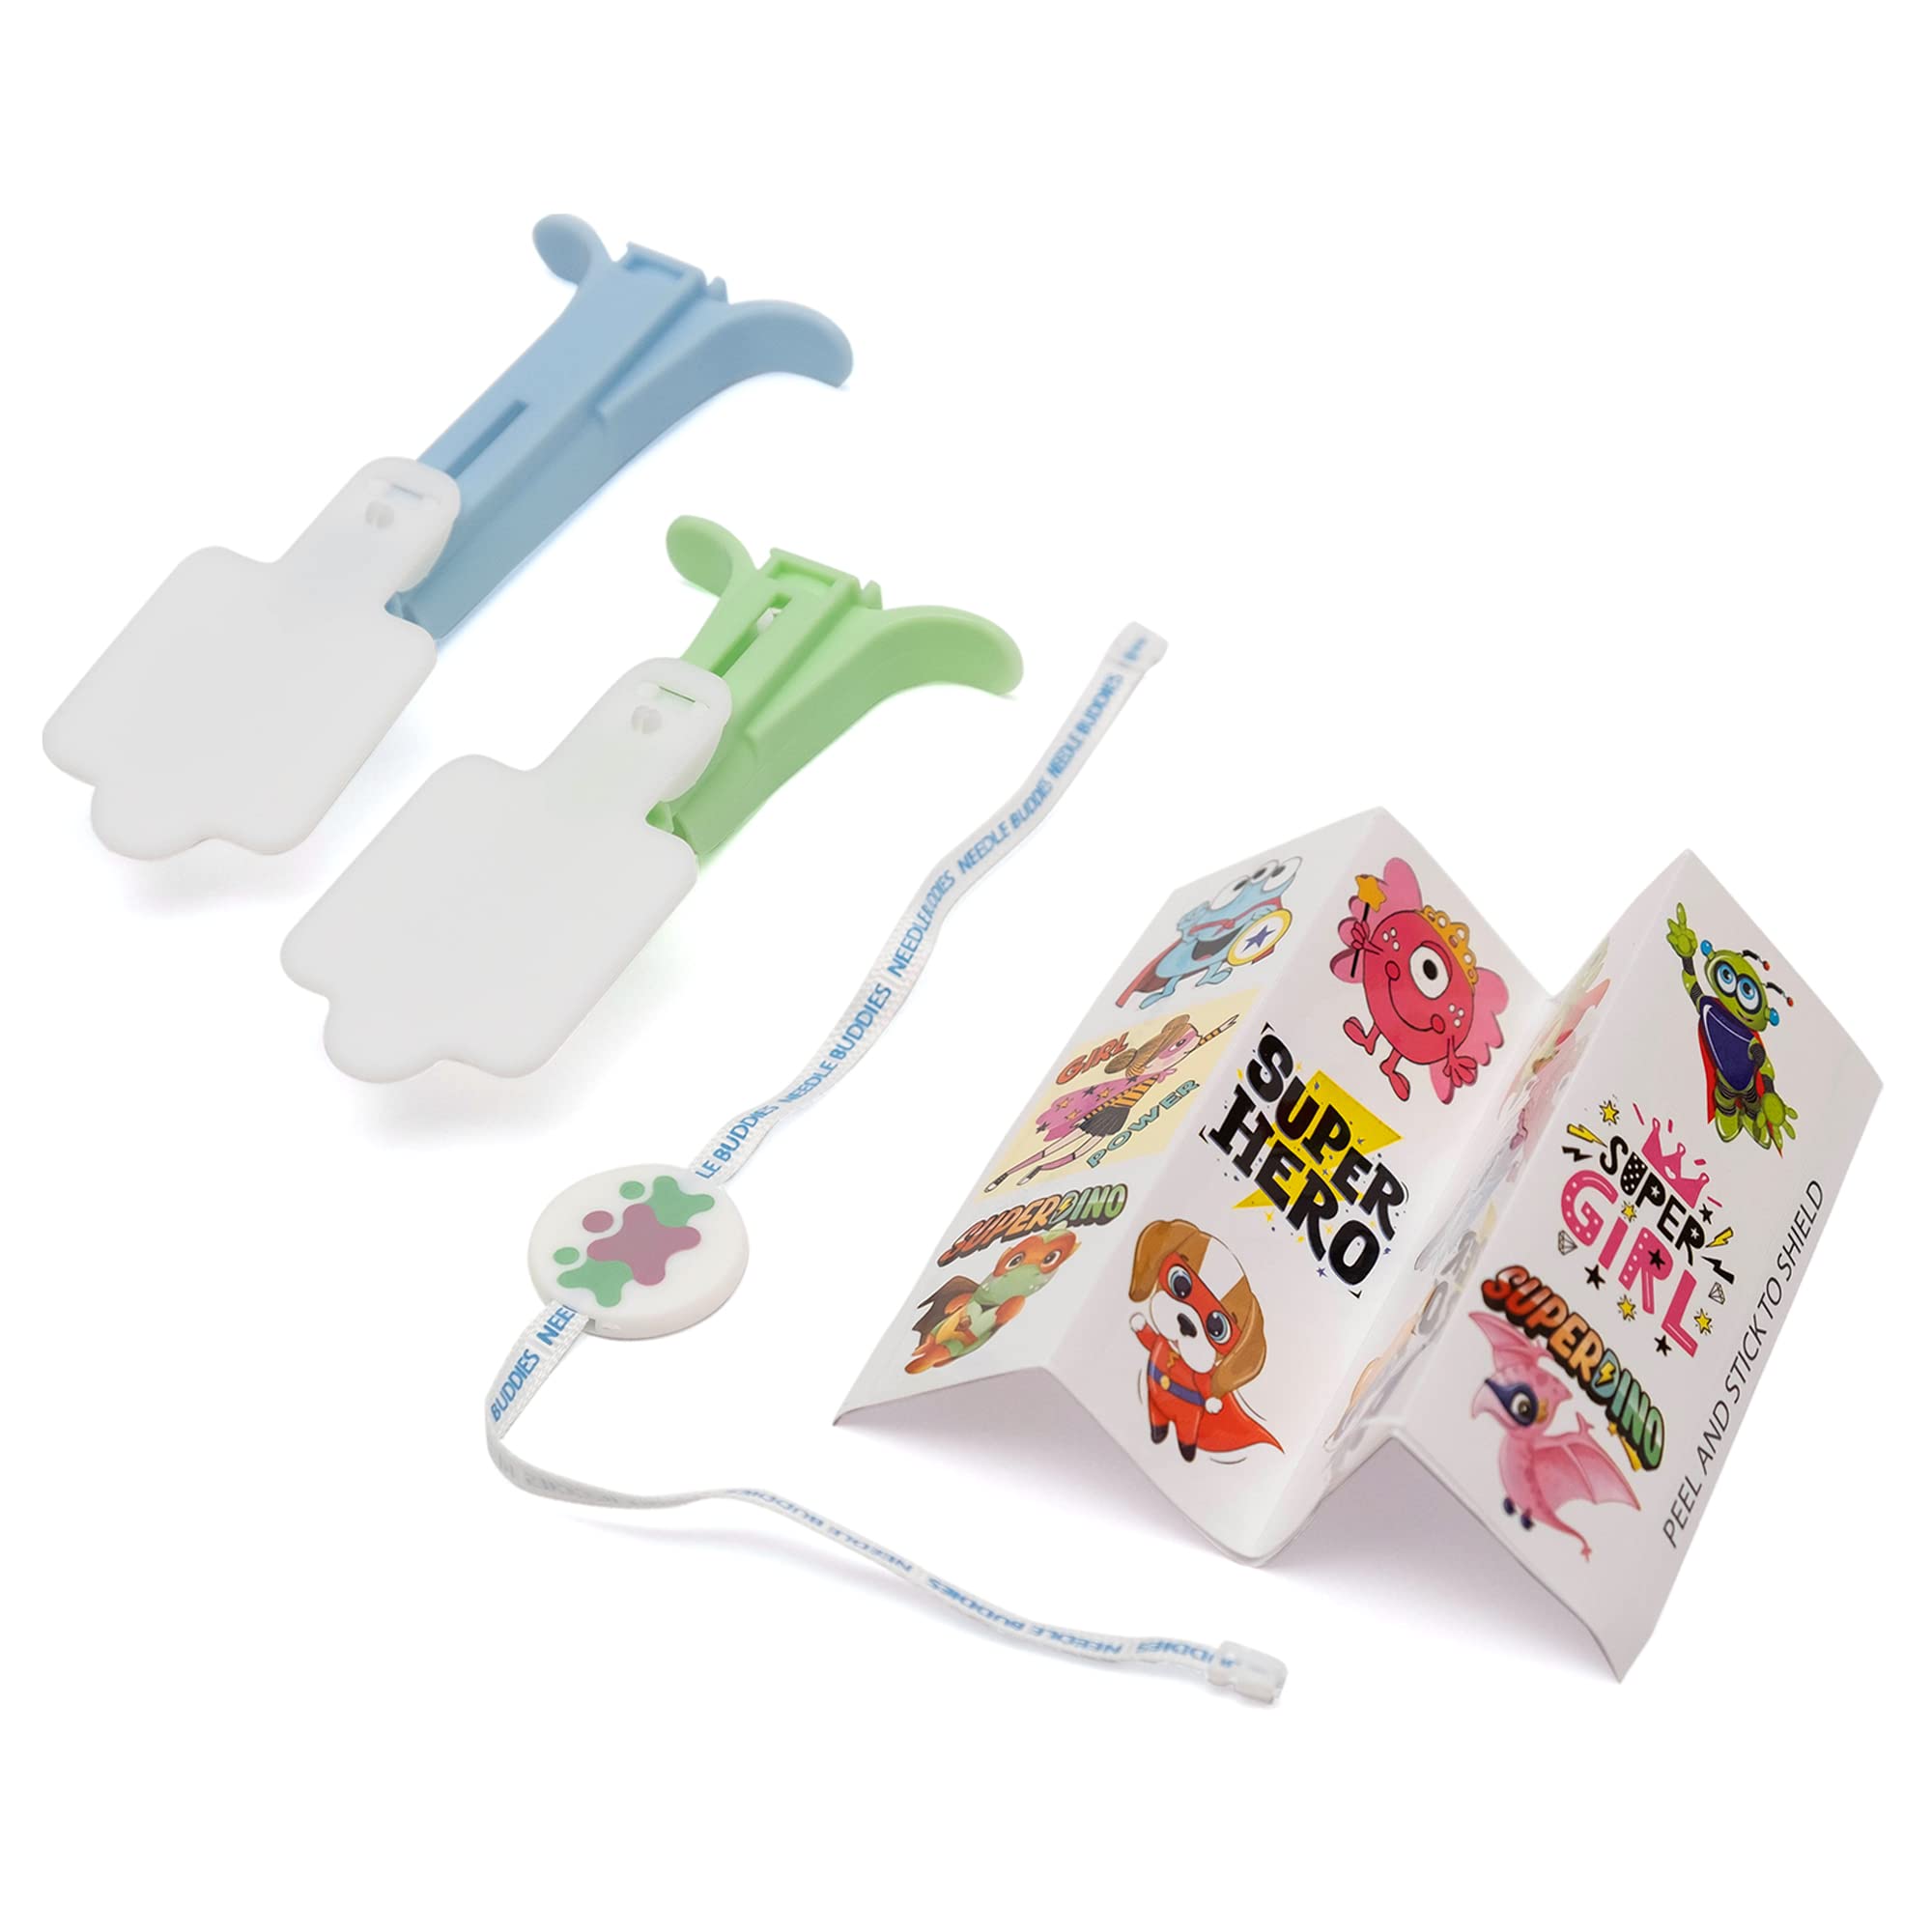 Needle Buddies - A Syringe Clip On to Disguise The Syringe and Scary Needle.  Ideal for Use with Kids Who Have an Aversion to Getting Injections.  Provides Relief for Childhood Injection Fear